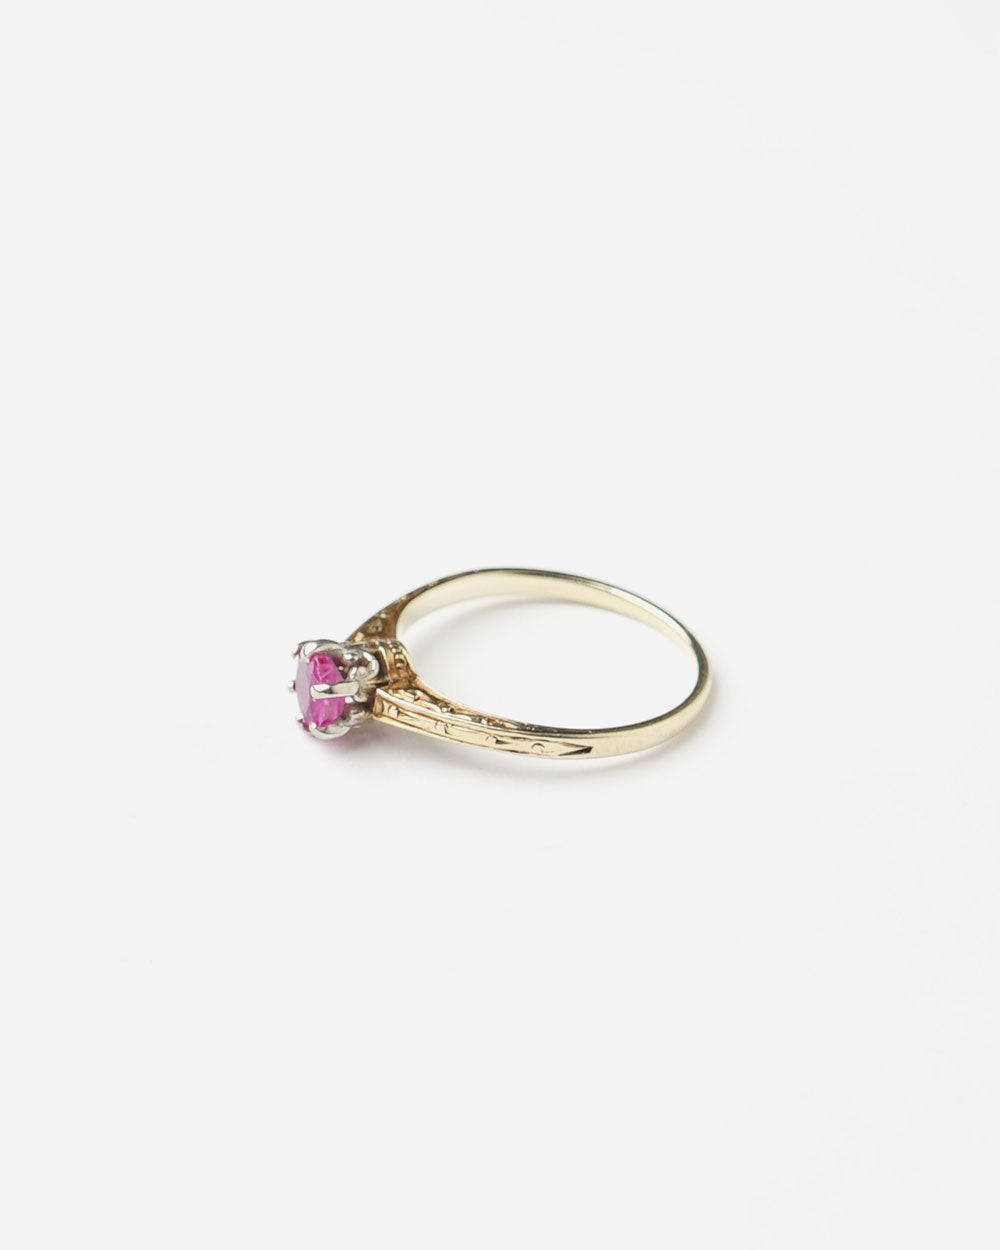 14k Gold Ring w/ Ruby / size: 7